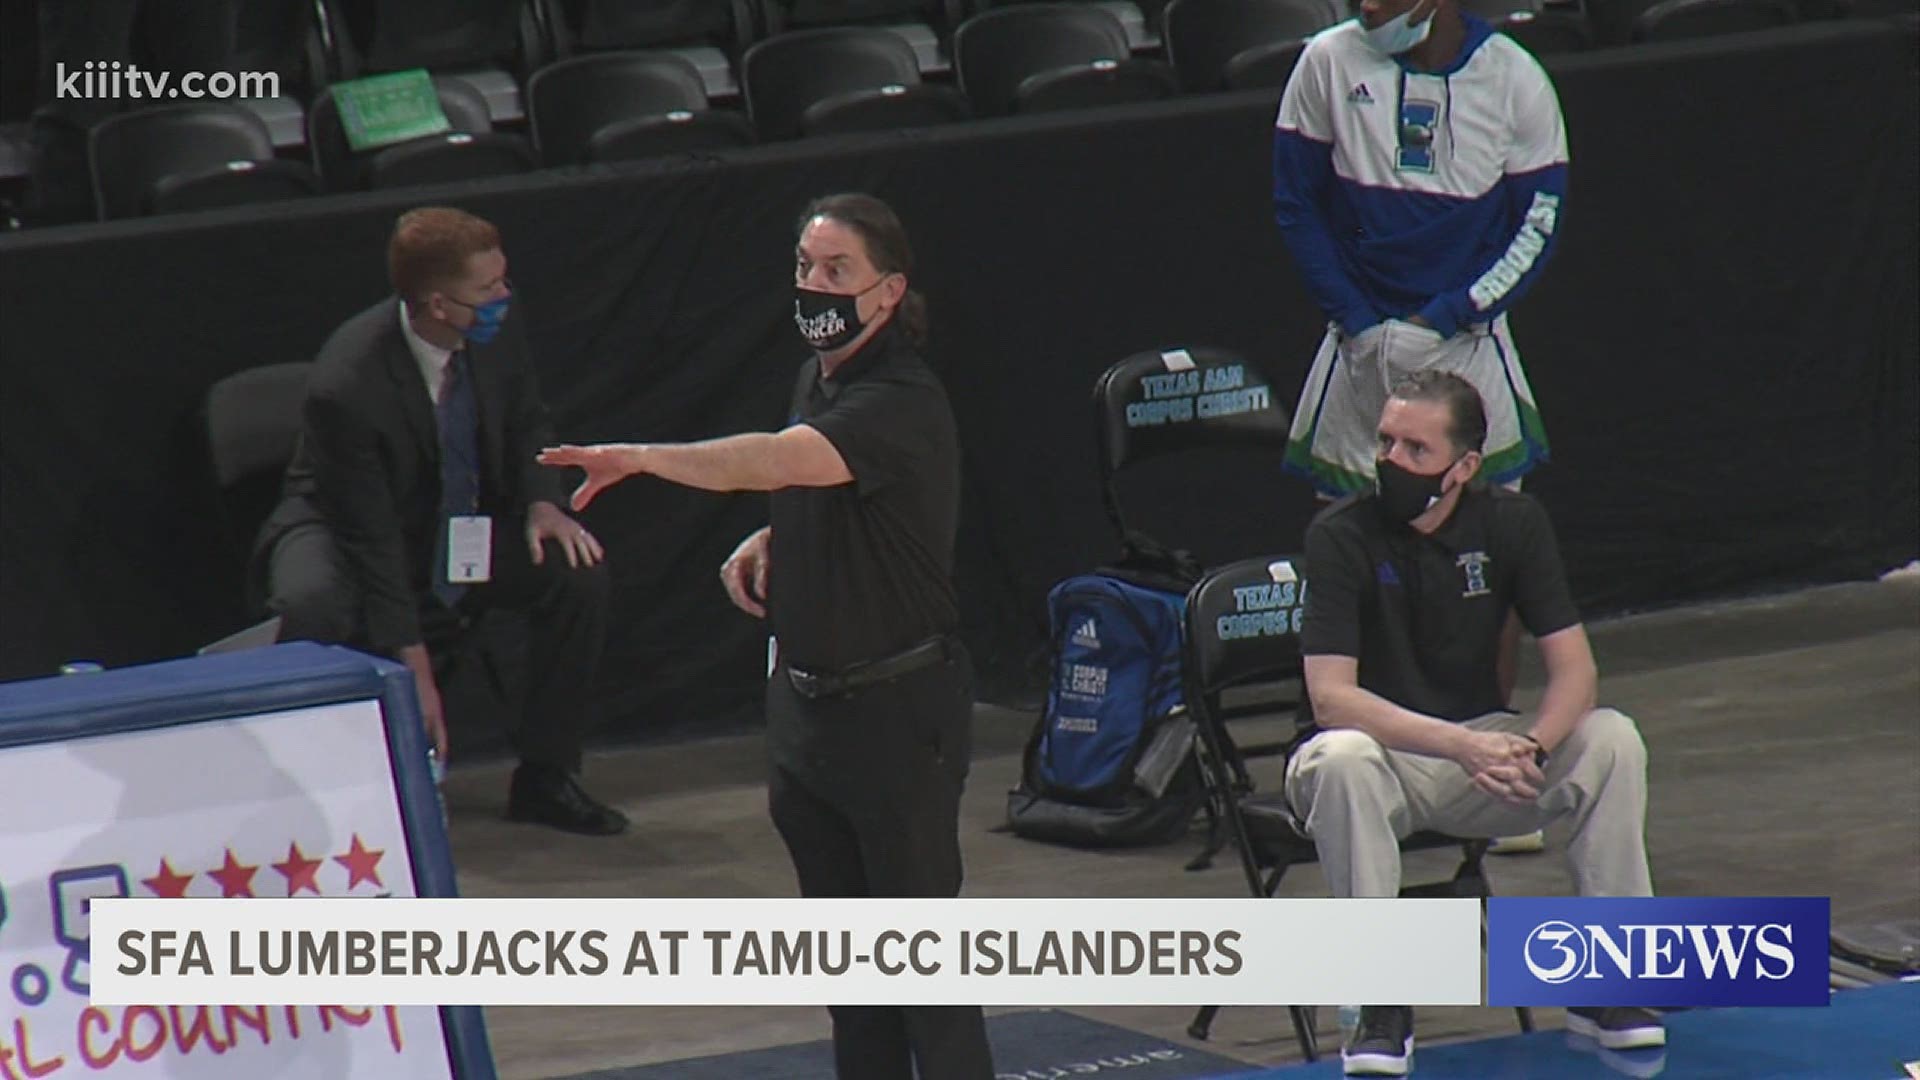 Texas A&M-CC fell to the Lumberjacks 84-75 after coming off two postponed games due to COVID-19. The Islanders were without Head Coach Willis Wilson.